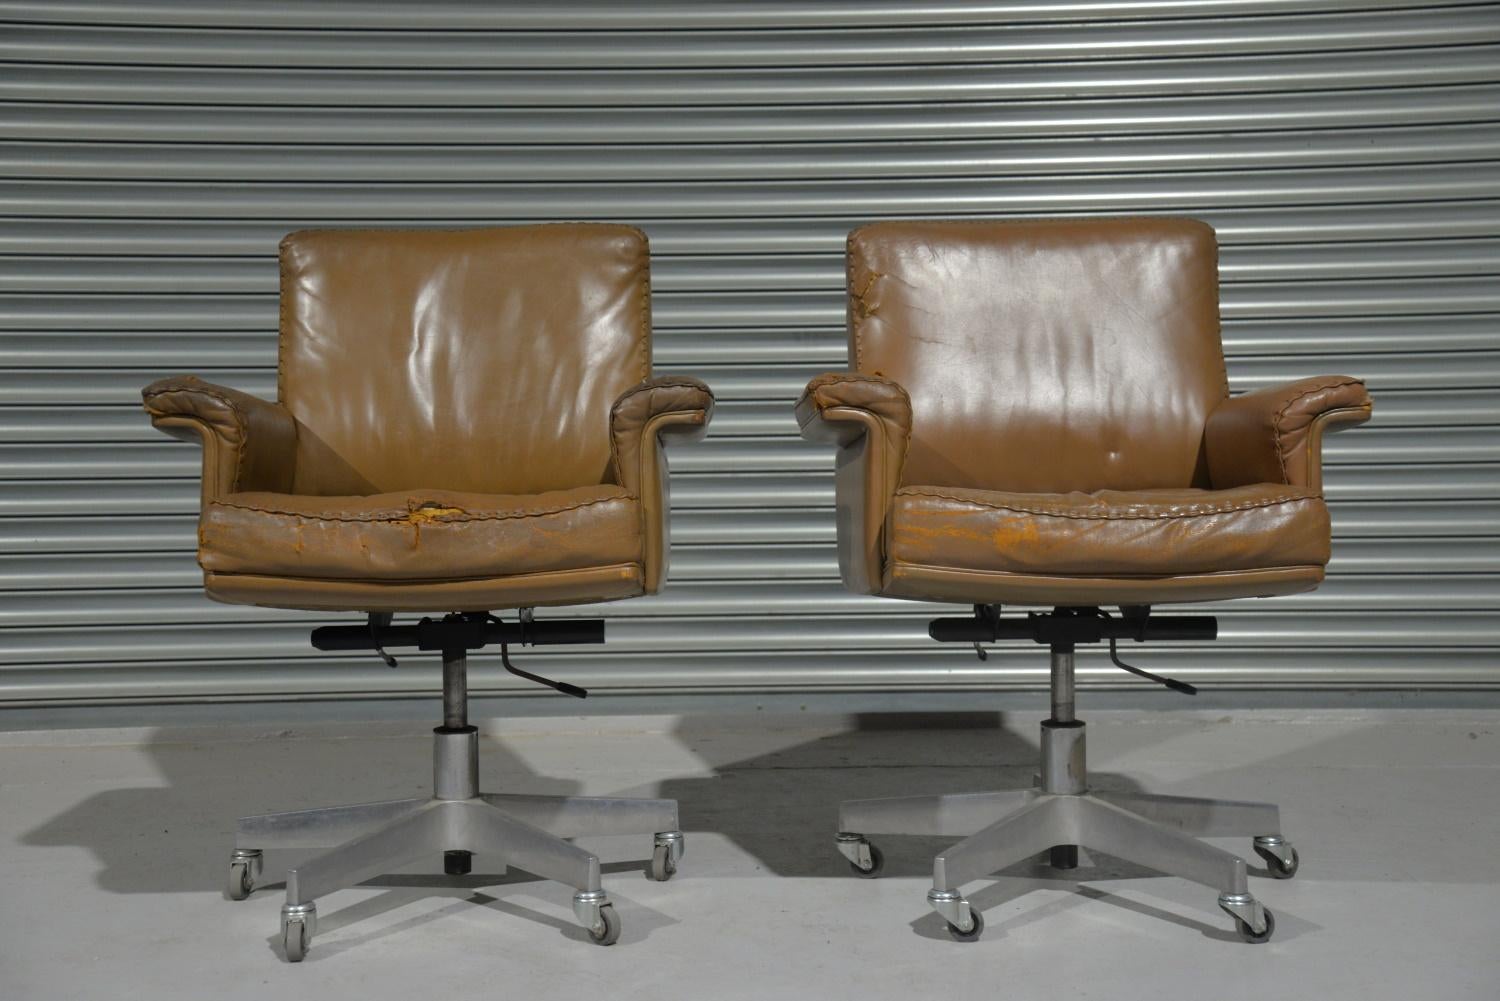 We are delighted to bring to you an extremely rare pair of original vintage de Sede DS 35 Executive swivel armchairs on casters. Built to incredibly high standards by De Sede craftsman in Switzerland. The iconic swivel armchair is upholstered in